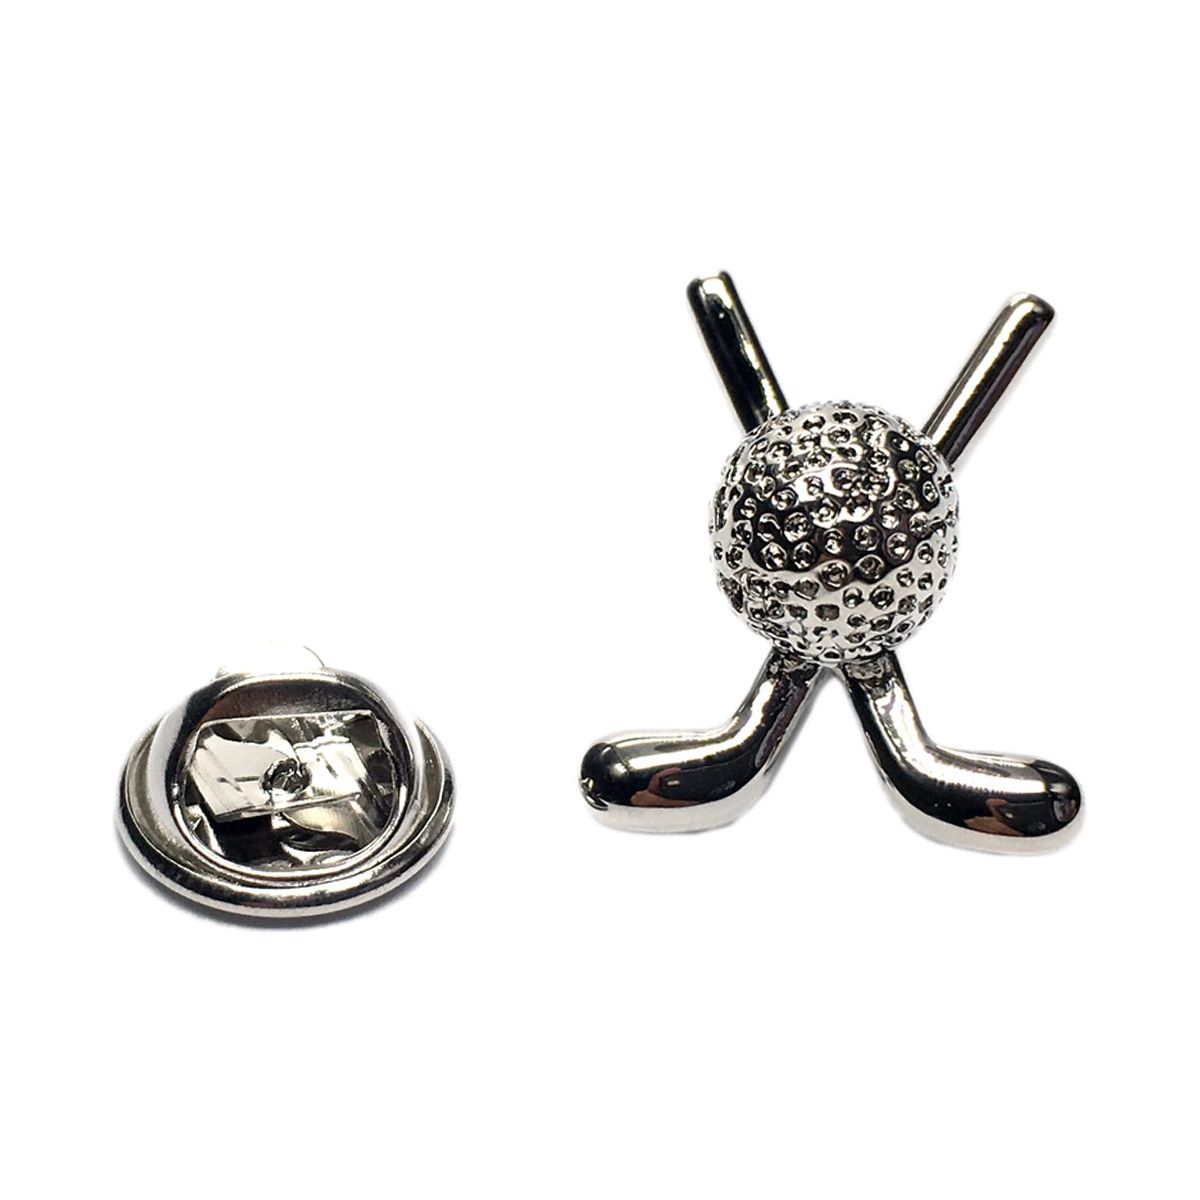 Crossed Golf Clubs & Ball Lapel Pin Badge - Ashton and Finch